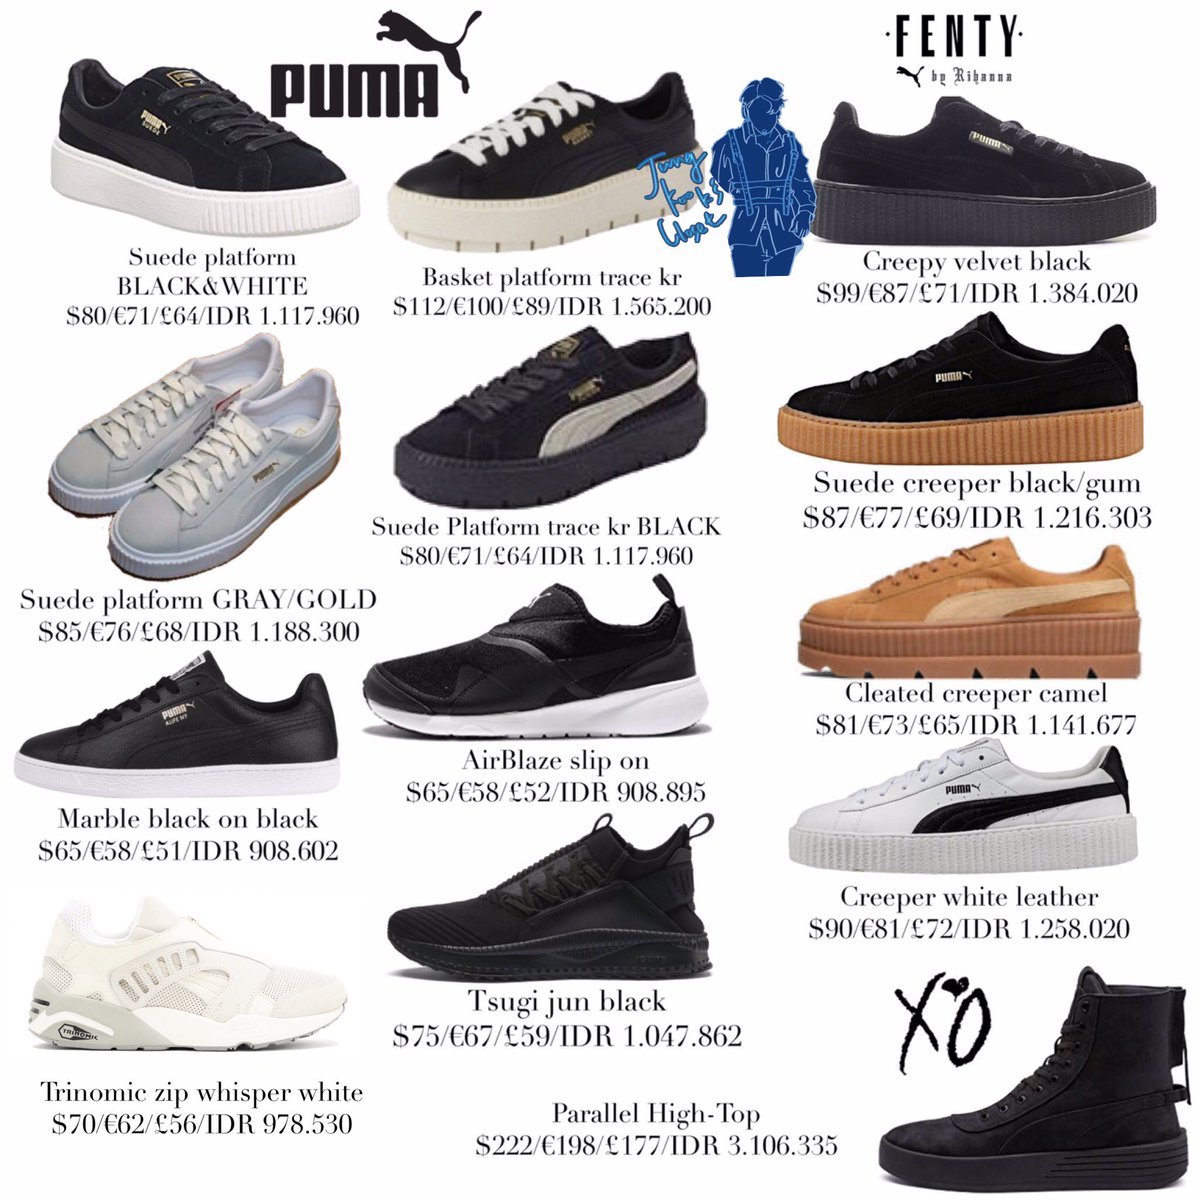 mineral Growl repeat BTS'CLOSET on Twitter: "JUNGKOOK SHOES COLLECTION PART ONE #jungkook  #btsjungkook #jungkookbts #jeonjungkook #bts #MTVHottes #puma #fila #adidas  #vans #timberland #balenciaga #nike GO CHECK the post on IG here !  https://t.co/x9XpkphnrZ https://t.co ...